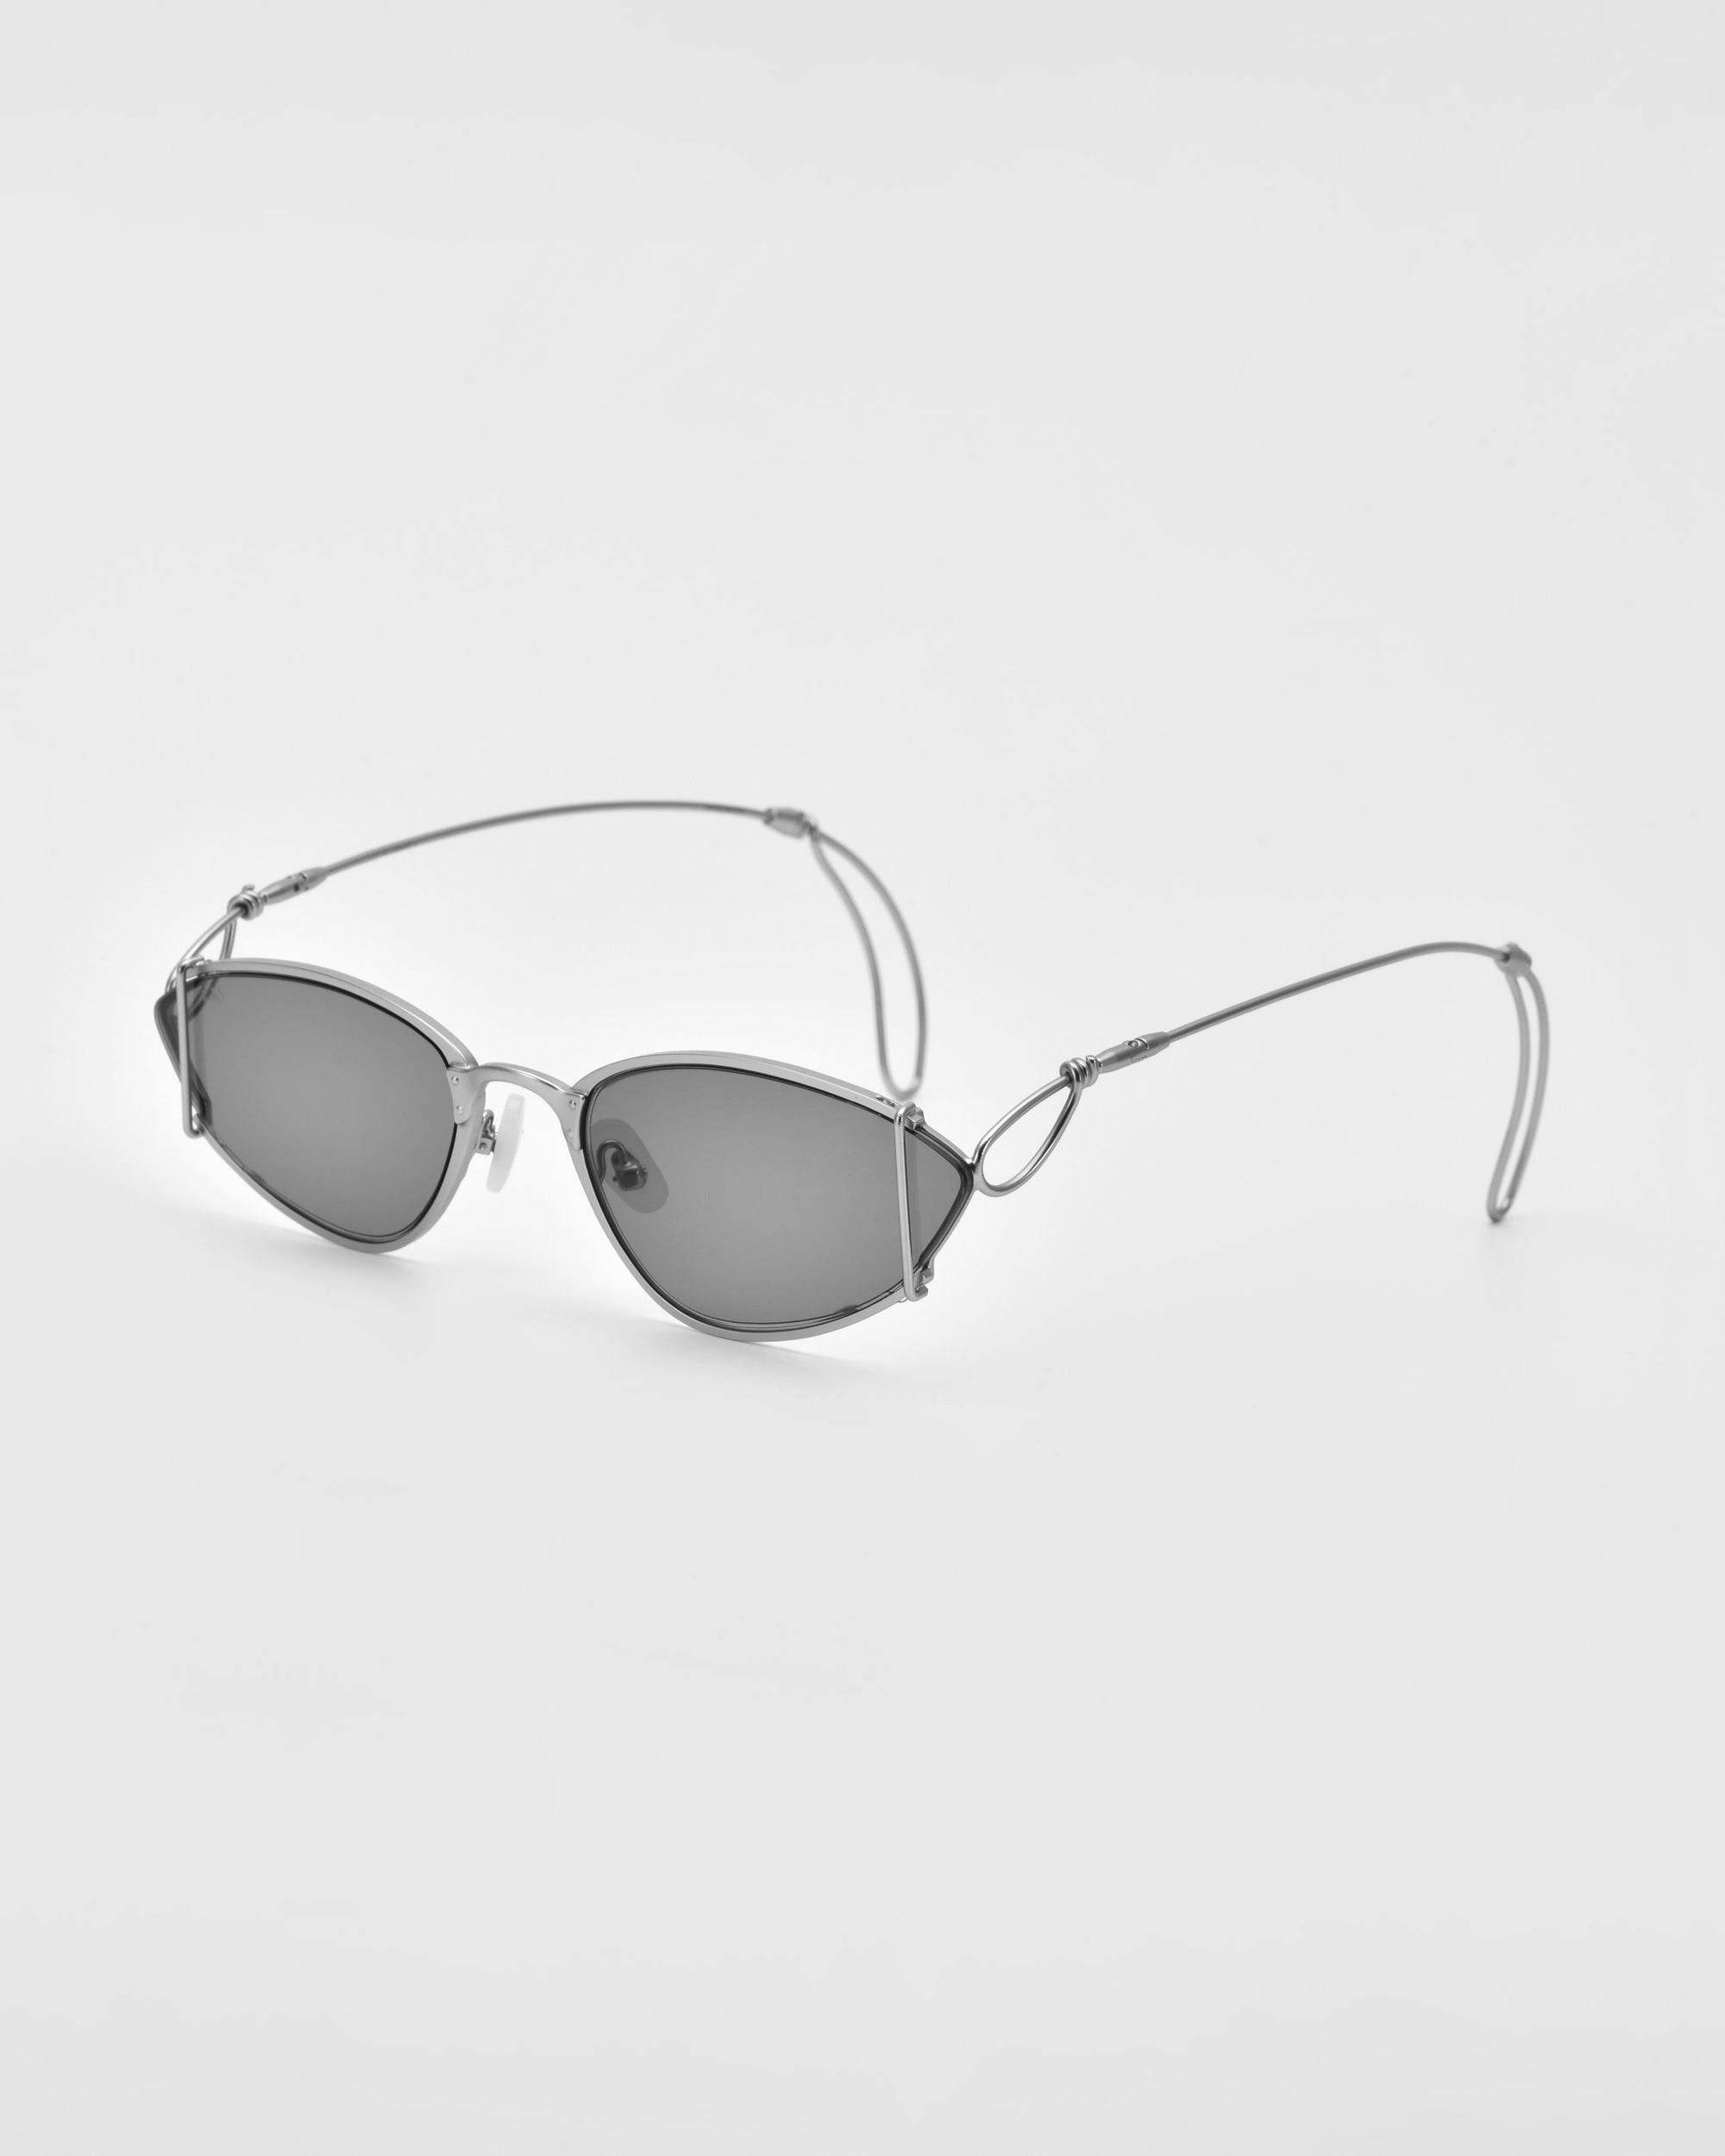 A pair of Ornate sunglasses by For Art&#39;s Sake® with sleek, thin metal frames and oval dark lenses. The arms feature intricate wire details, giving them a modern minimalist look while providing essential UV protection. The background is plain white.